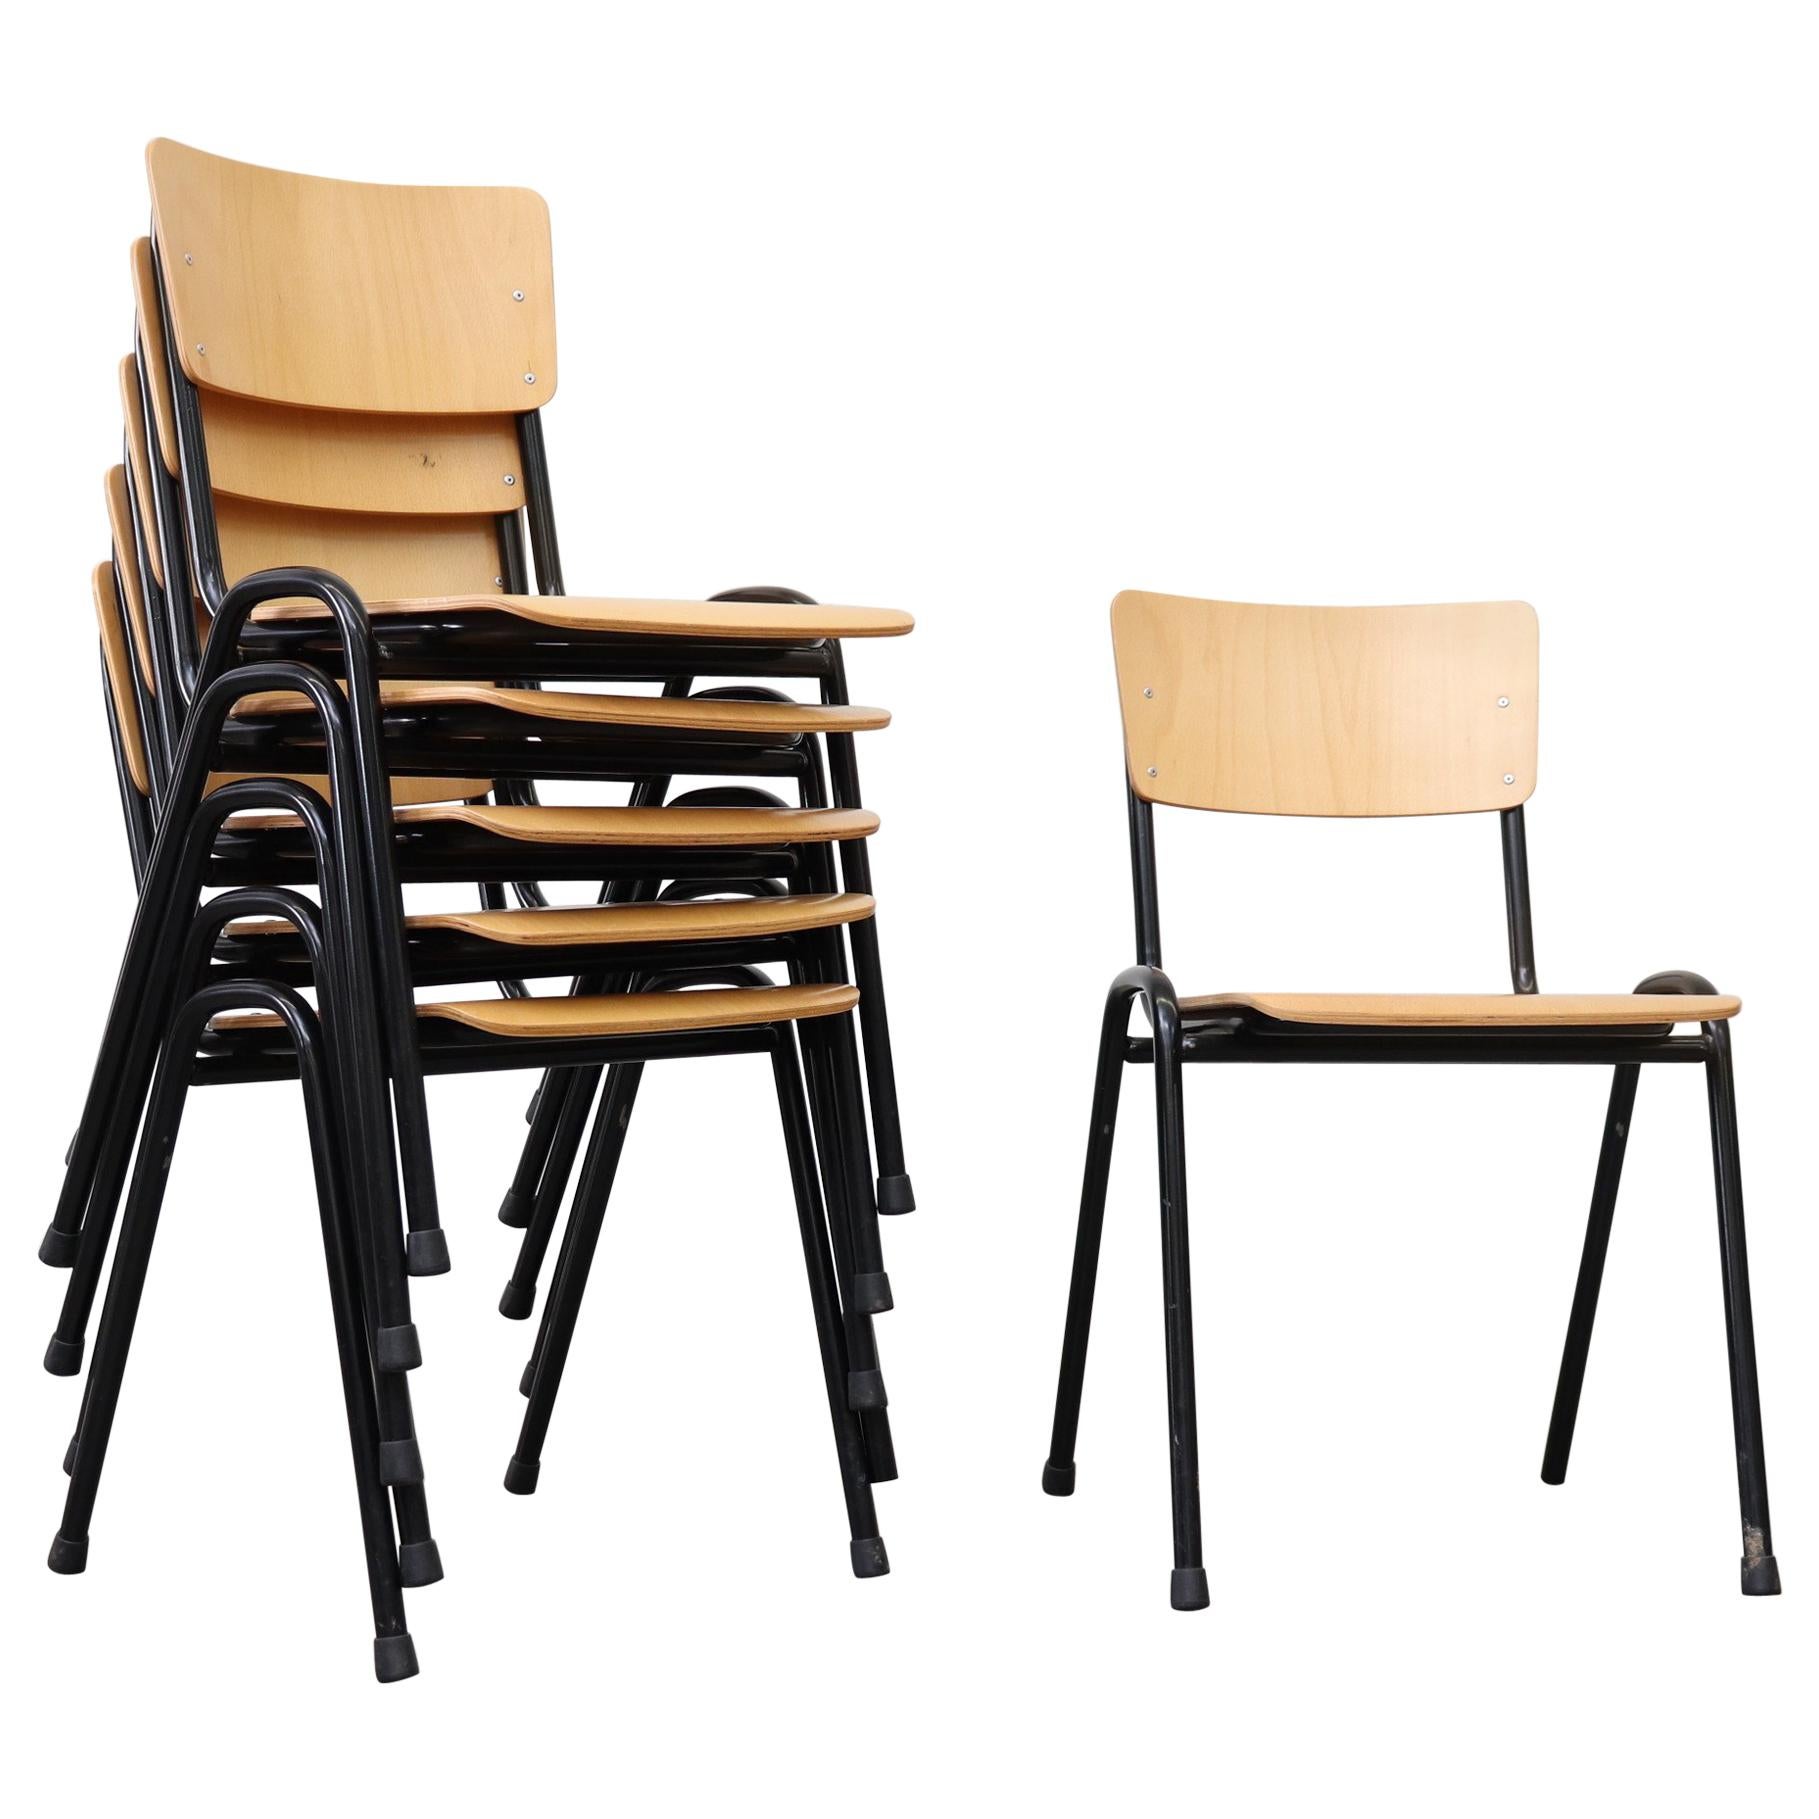 Blonde Plywood Industrial Stacking Chairs with Black Enameled Metal Frame